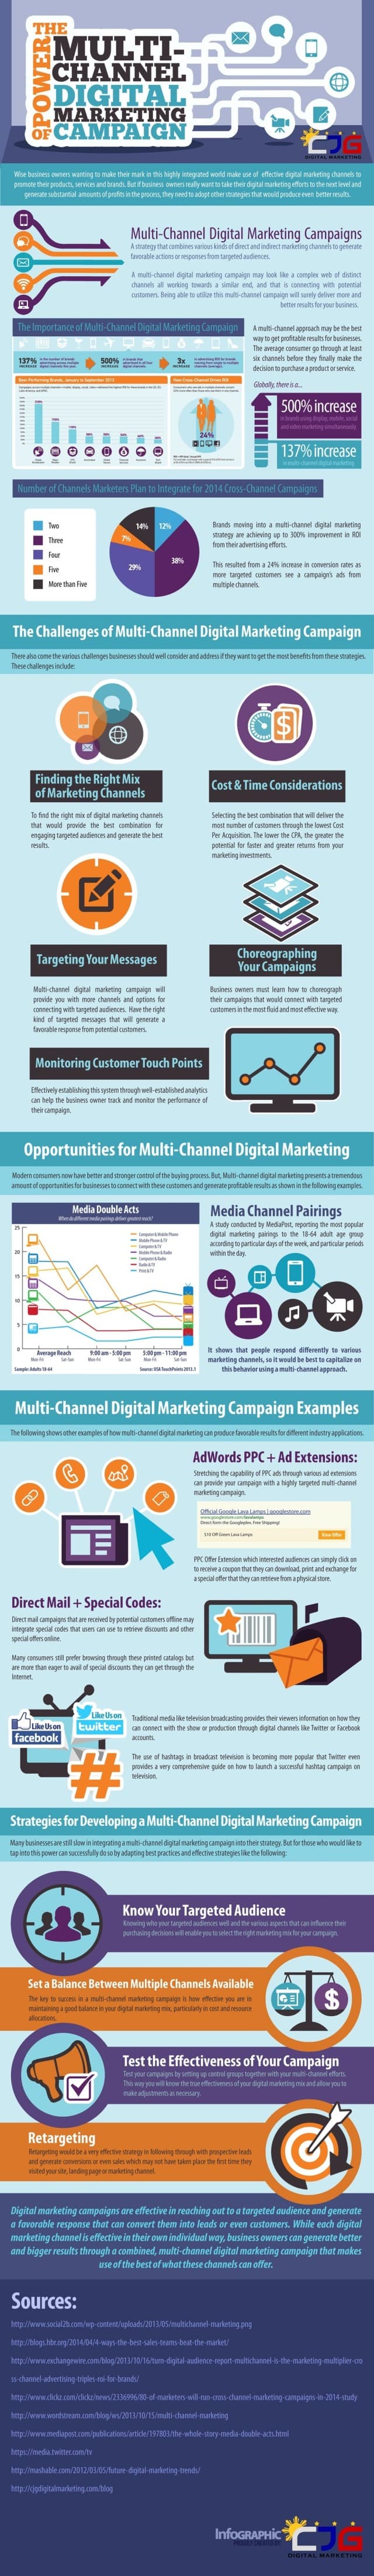 The-Power-of-Multi-Channel-Digital-Marketing-Campaign-640x44031442931525